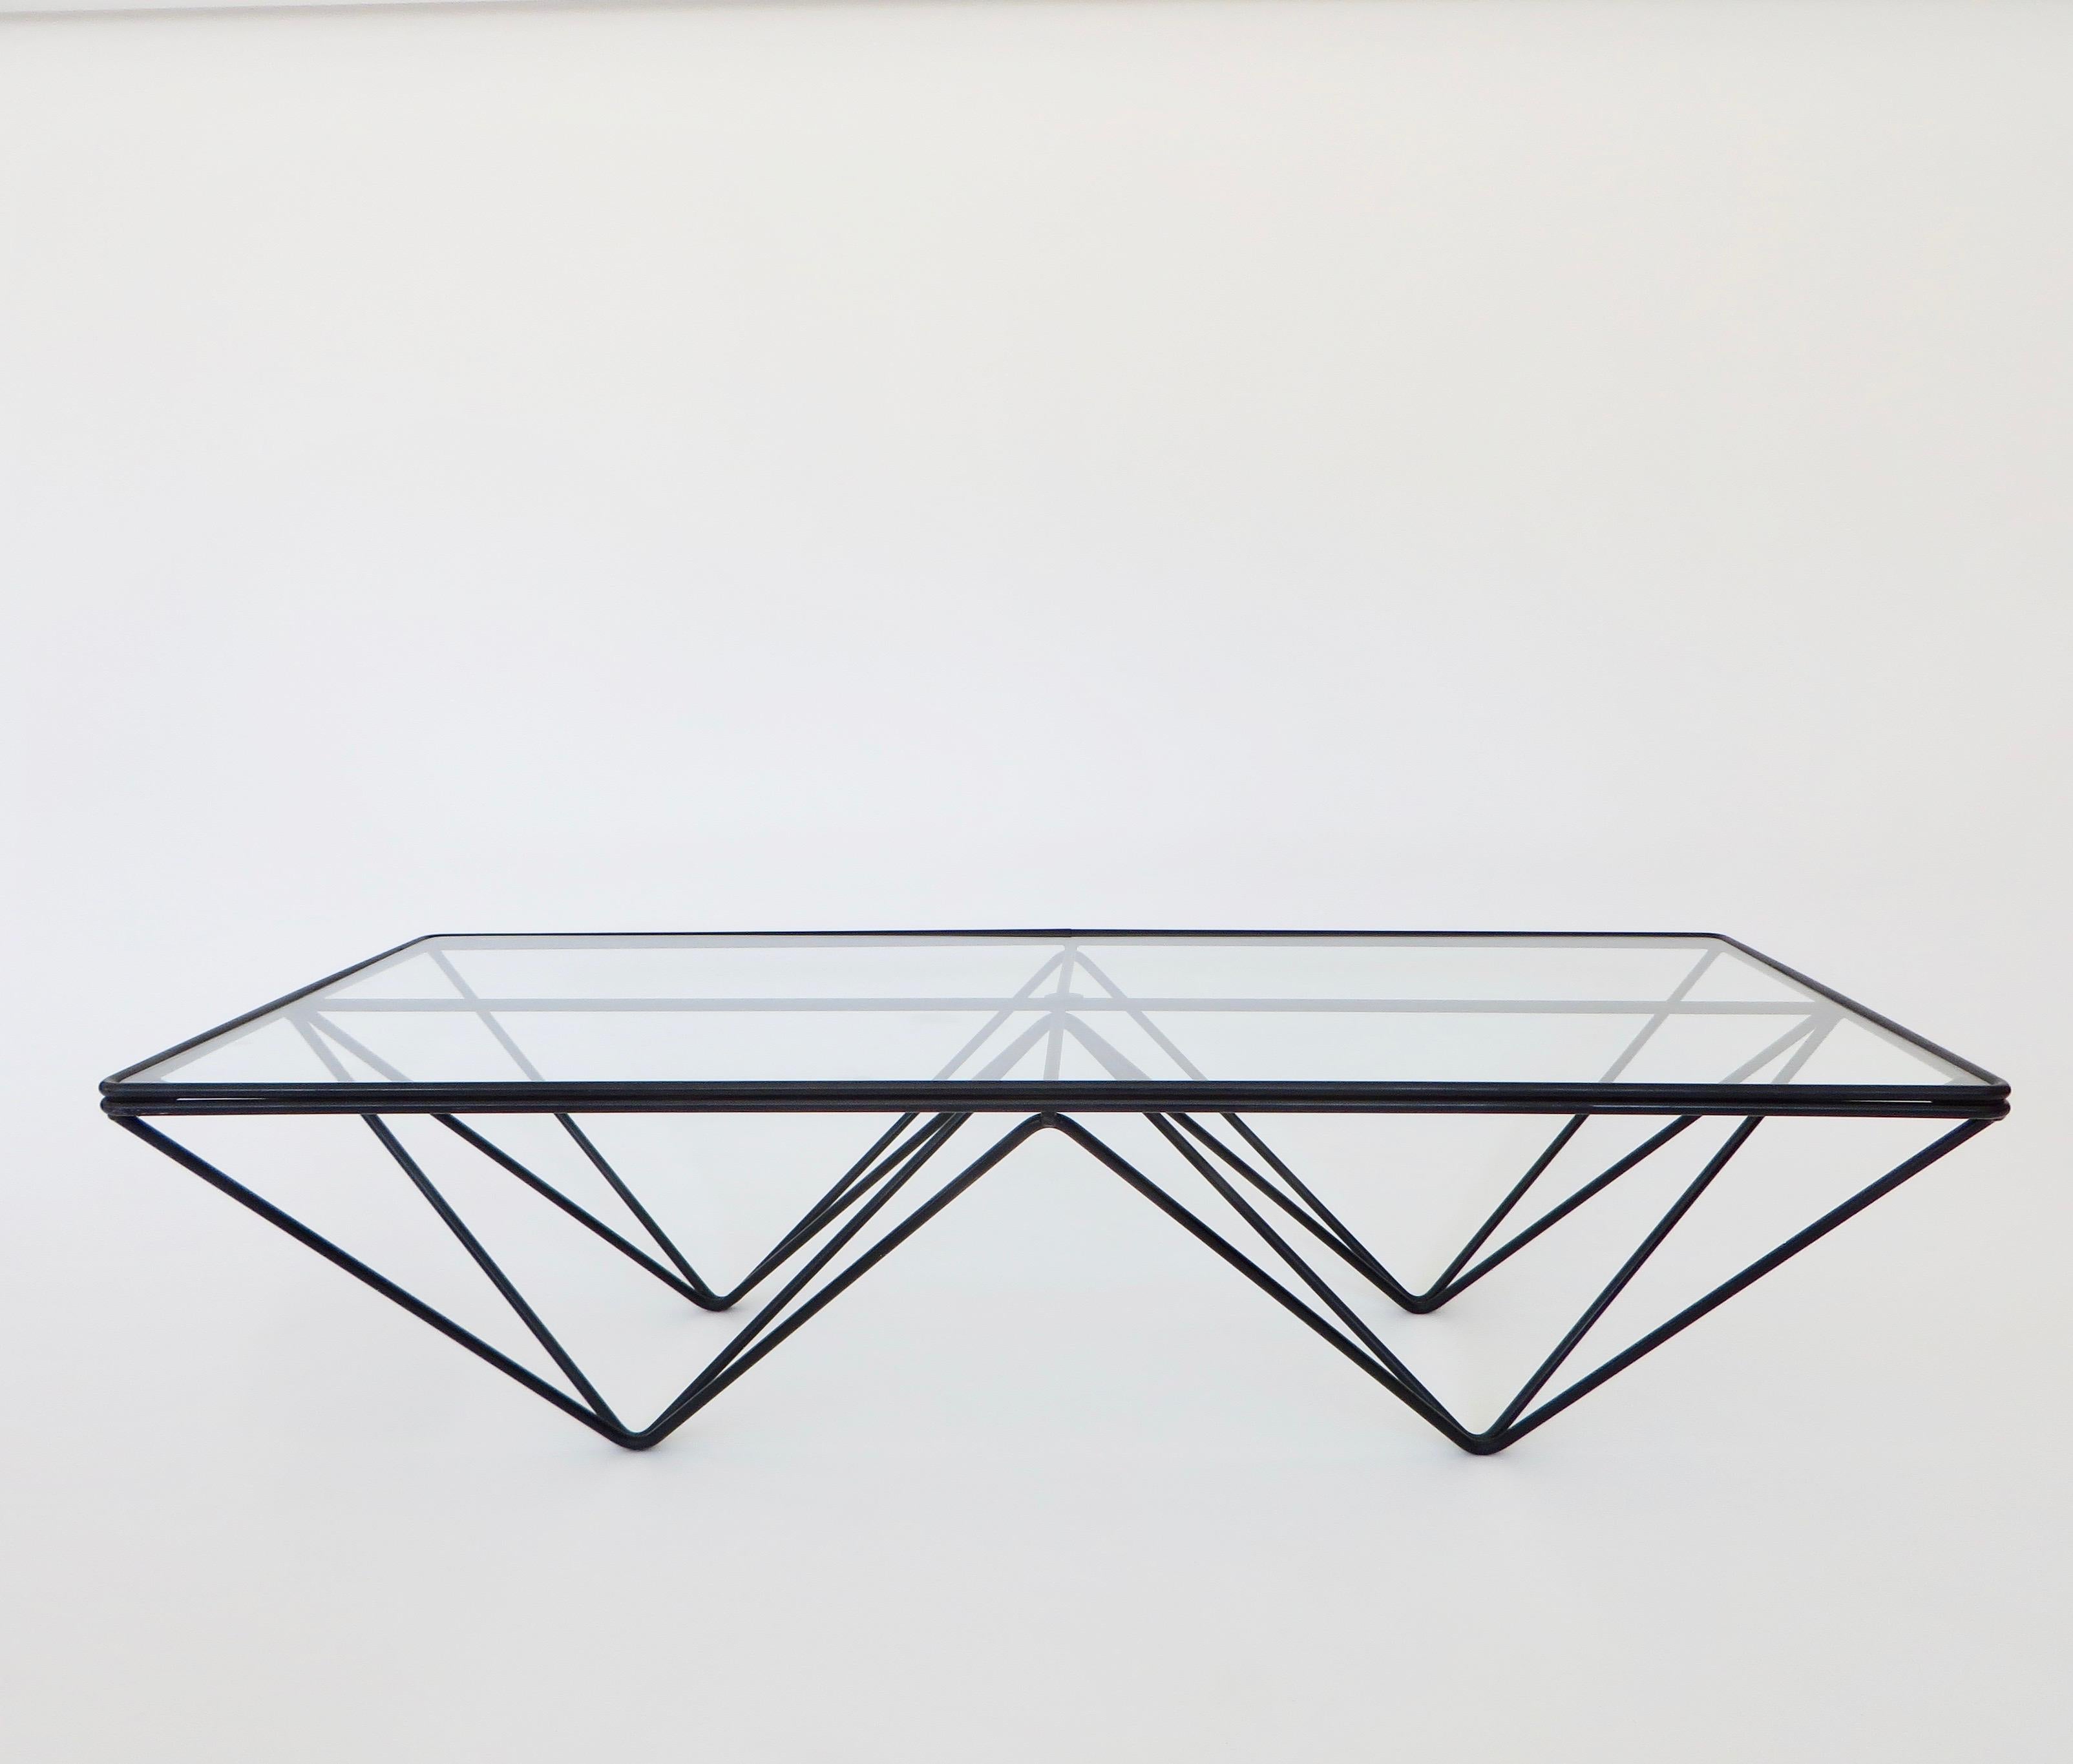 A coffee table in the style of the Alanda low coffee table by Paolo Piva of welded black enamel steel rods with a new glass top. 
Welded enameled steel rods with a glass top.
This could be used as a small coffee table or a side table. New glass.